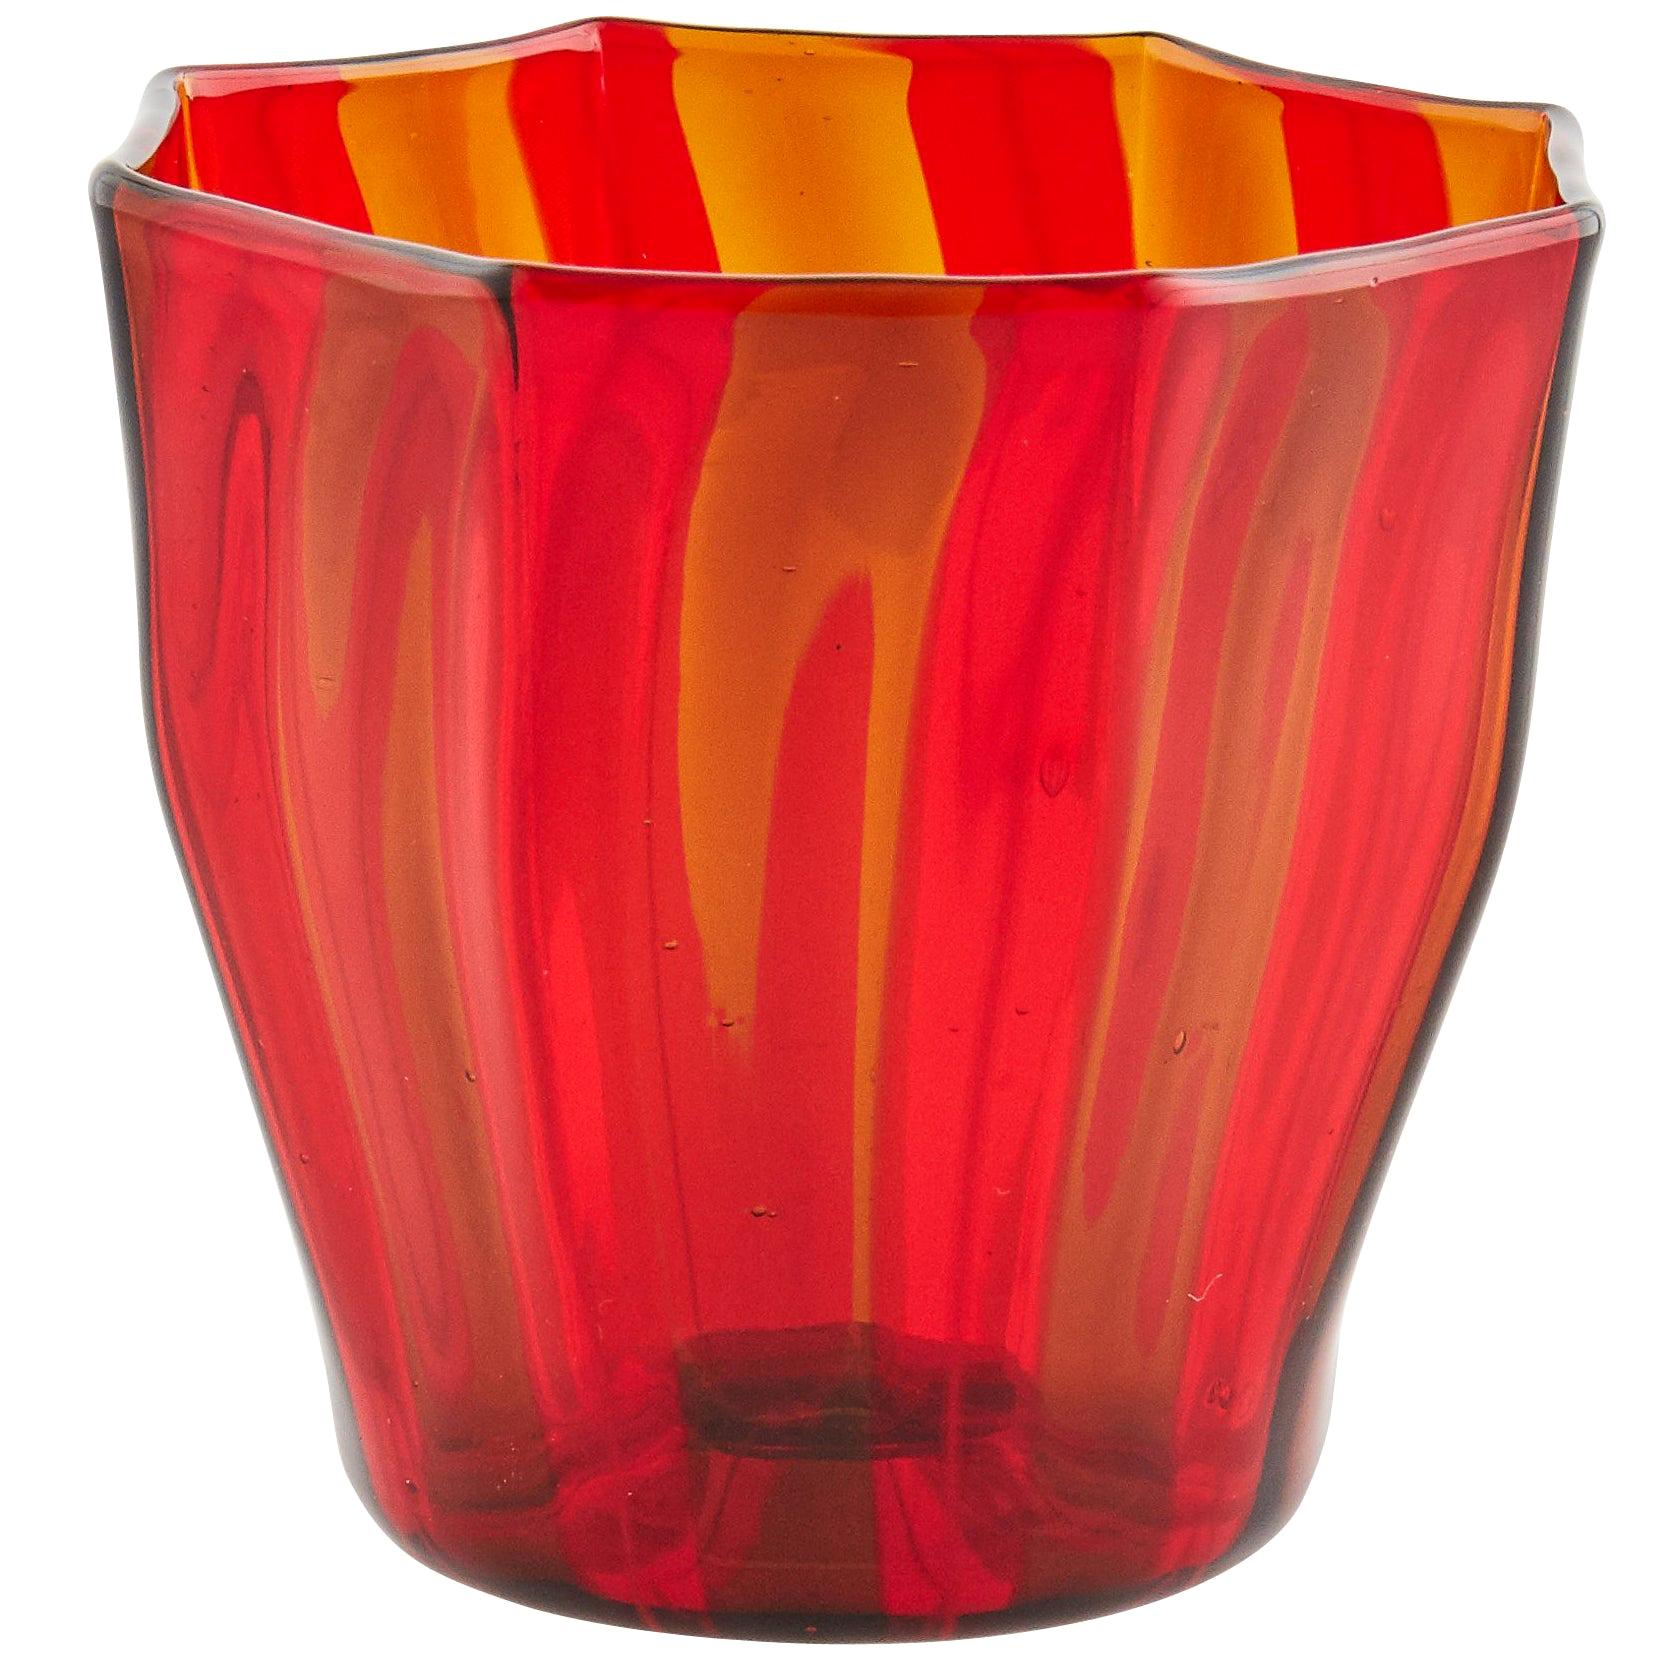 Campbell-Rey Octagonal Striped Tumbler in Red and Amber Murano Glass